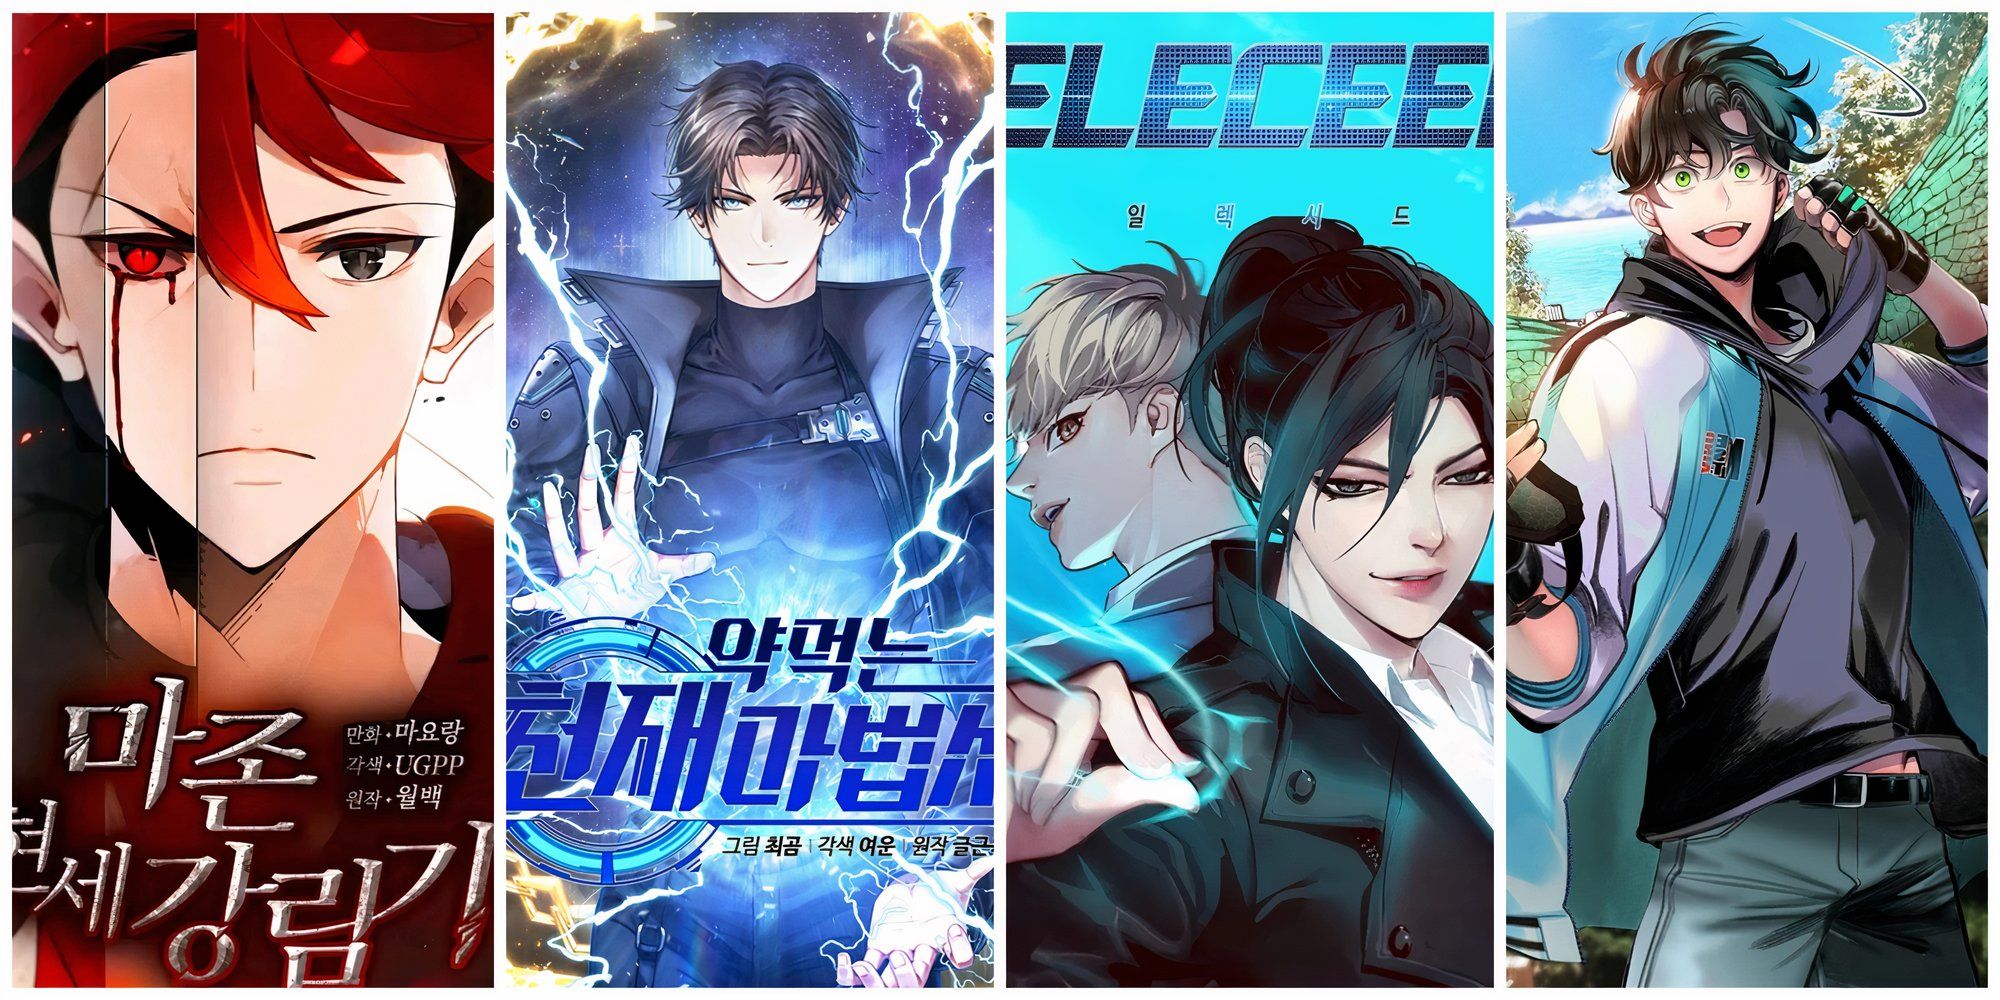 10 Manhwa Series With Unique Secret Societies collage with manhwa covers of Descent of the Dark Demon, Genius Medicinal Mage, Eleceed, and Jungle Juice